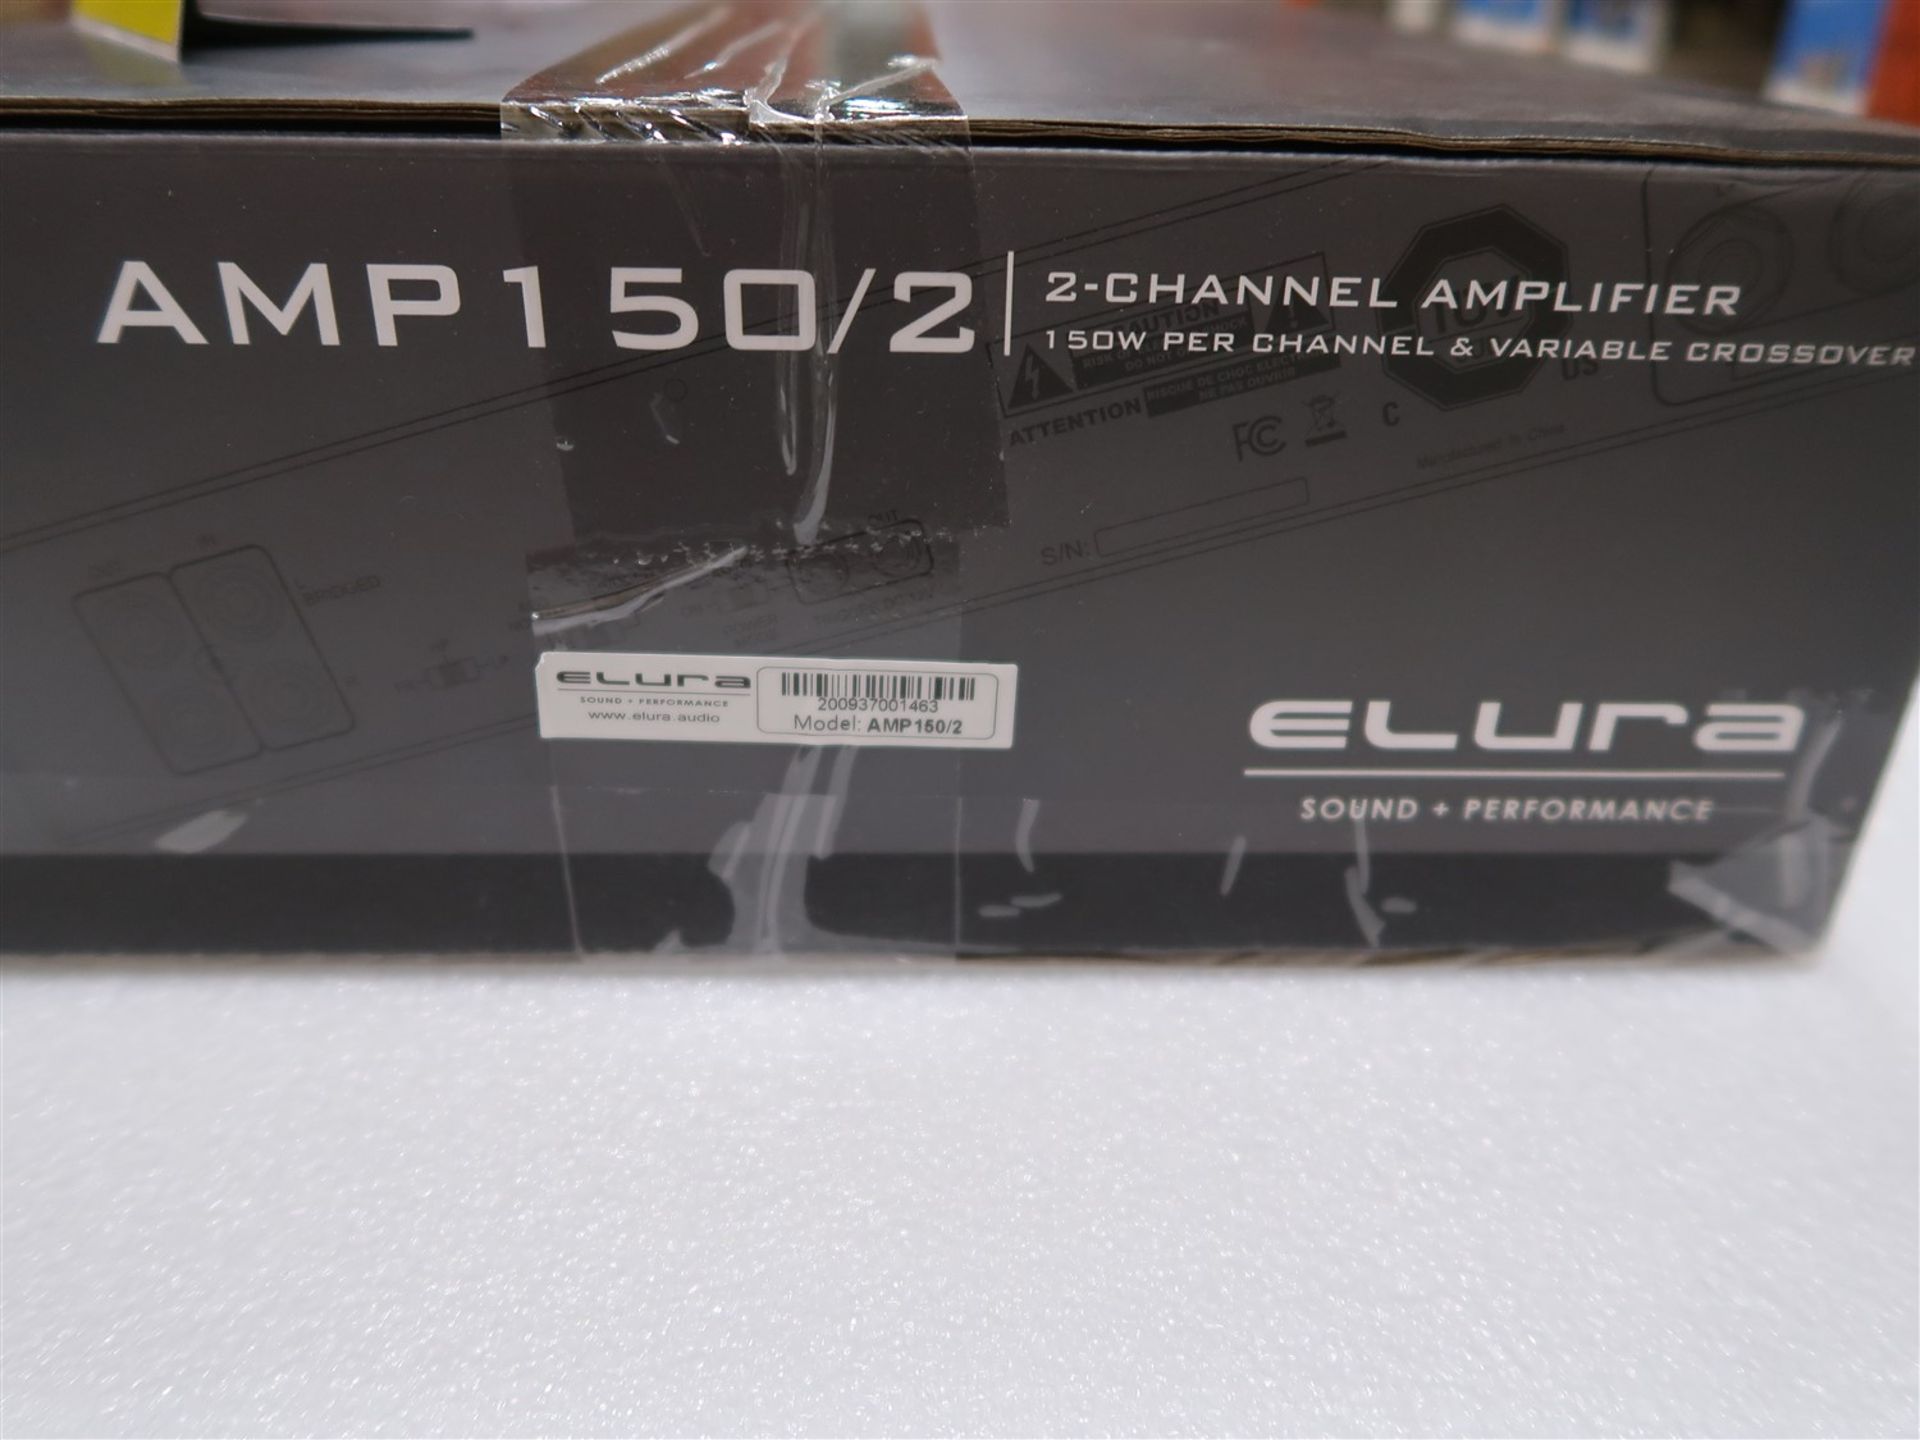 ELURA 2-CHANNEL AMPLIFIER, MOD. AMP150/2, 150W PER CHANNEL AND VARIABLE CROSSOVER, (BNIB) MSRP $720 - Image 2 of 2